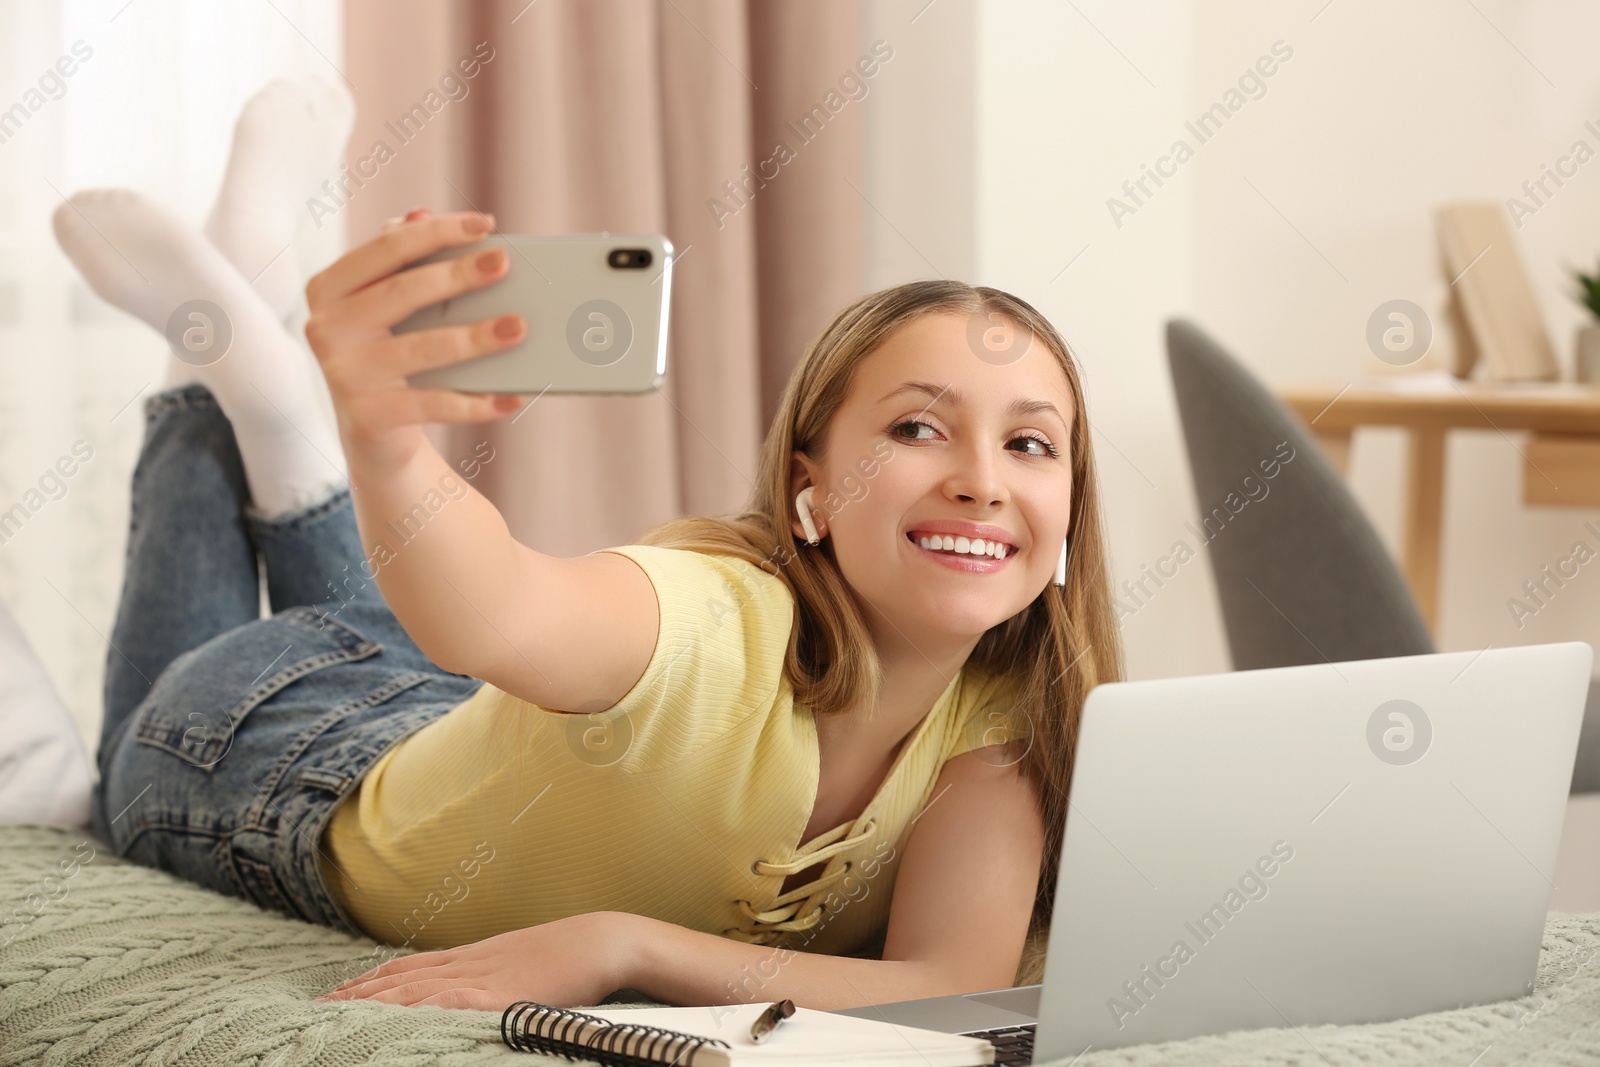 Photo of Teenage girl taking selfie on bed at home